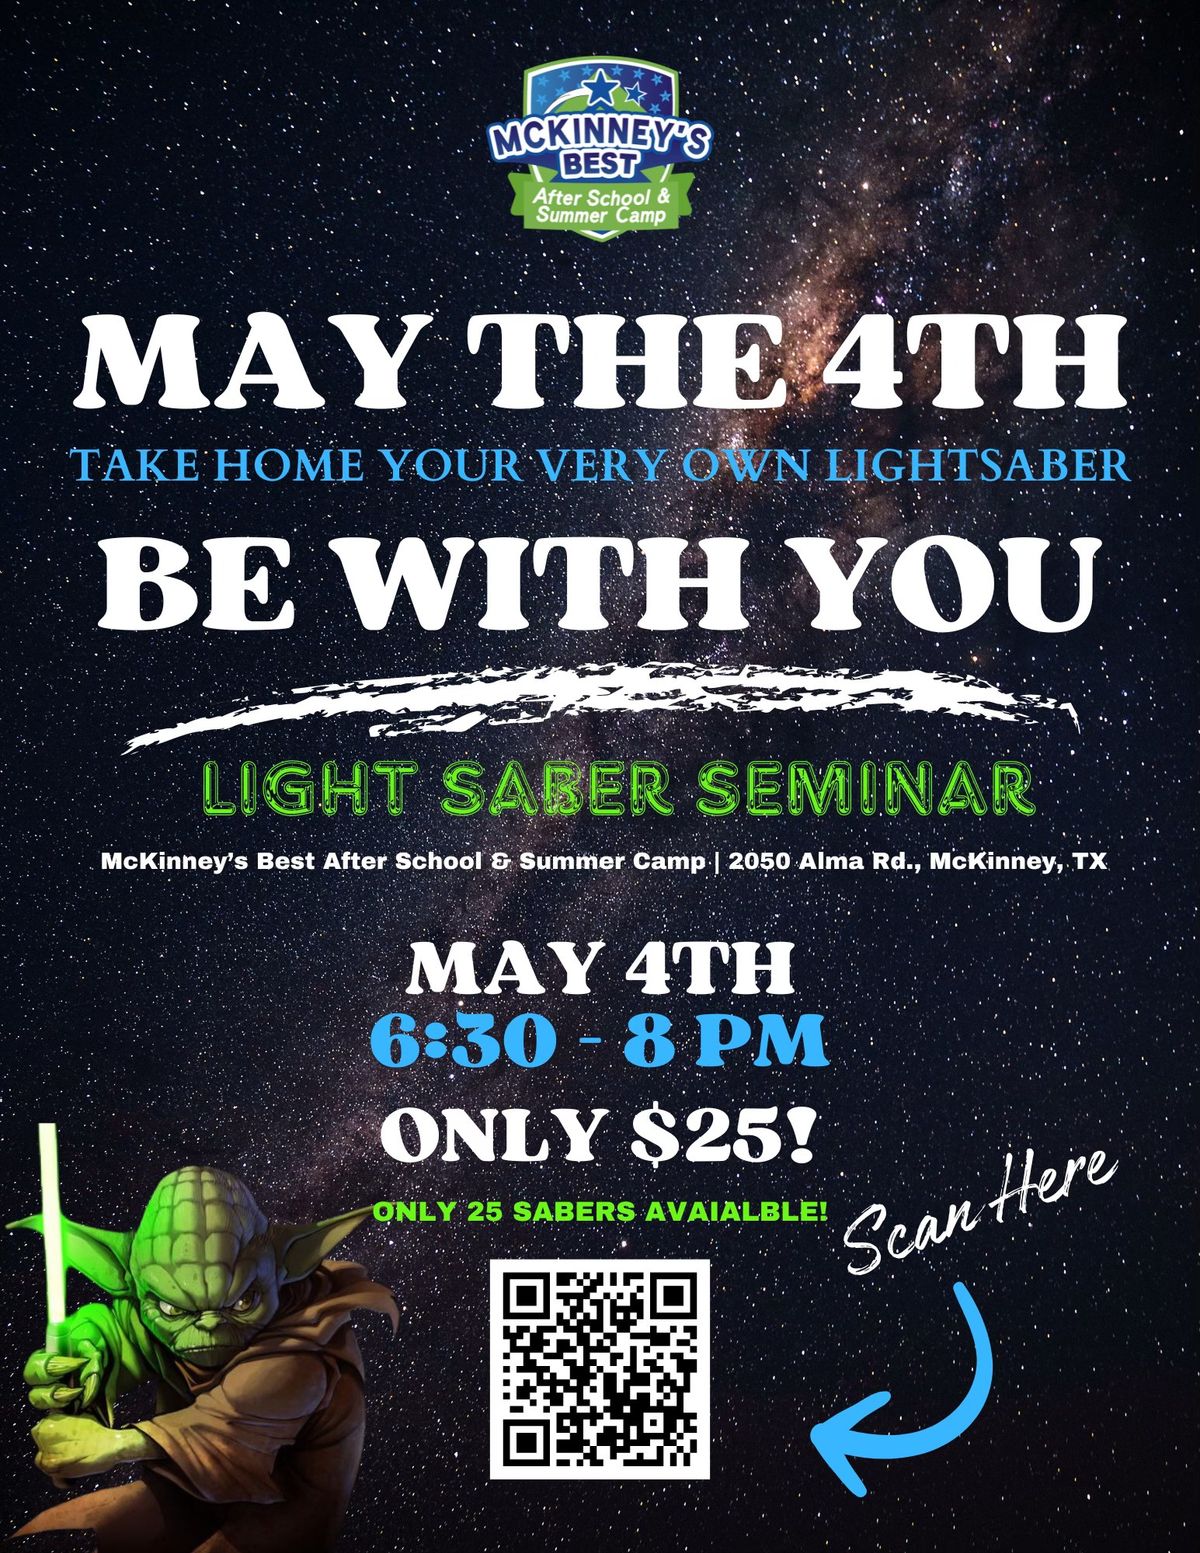 May The 4th Be With You - Light Saber Seminar